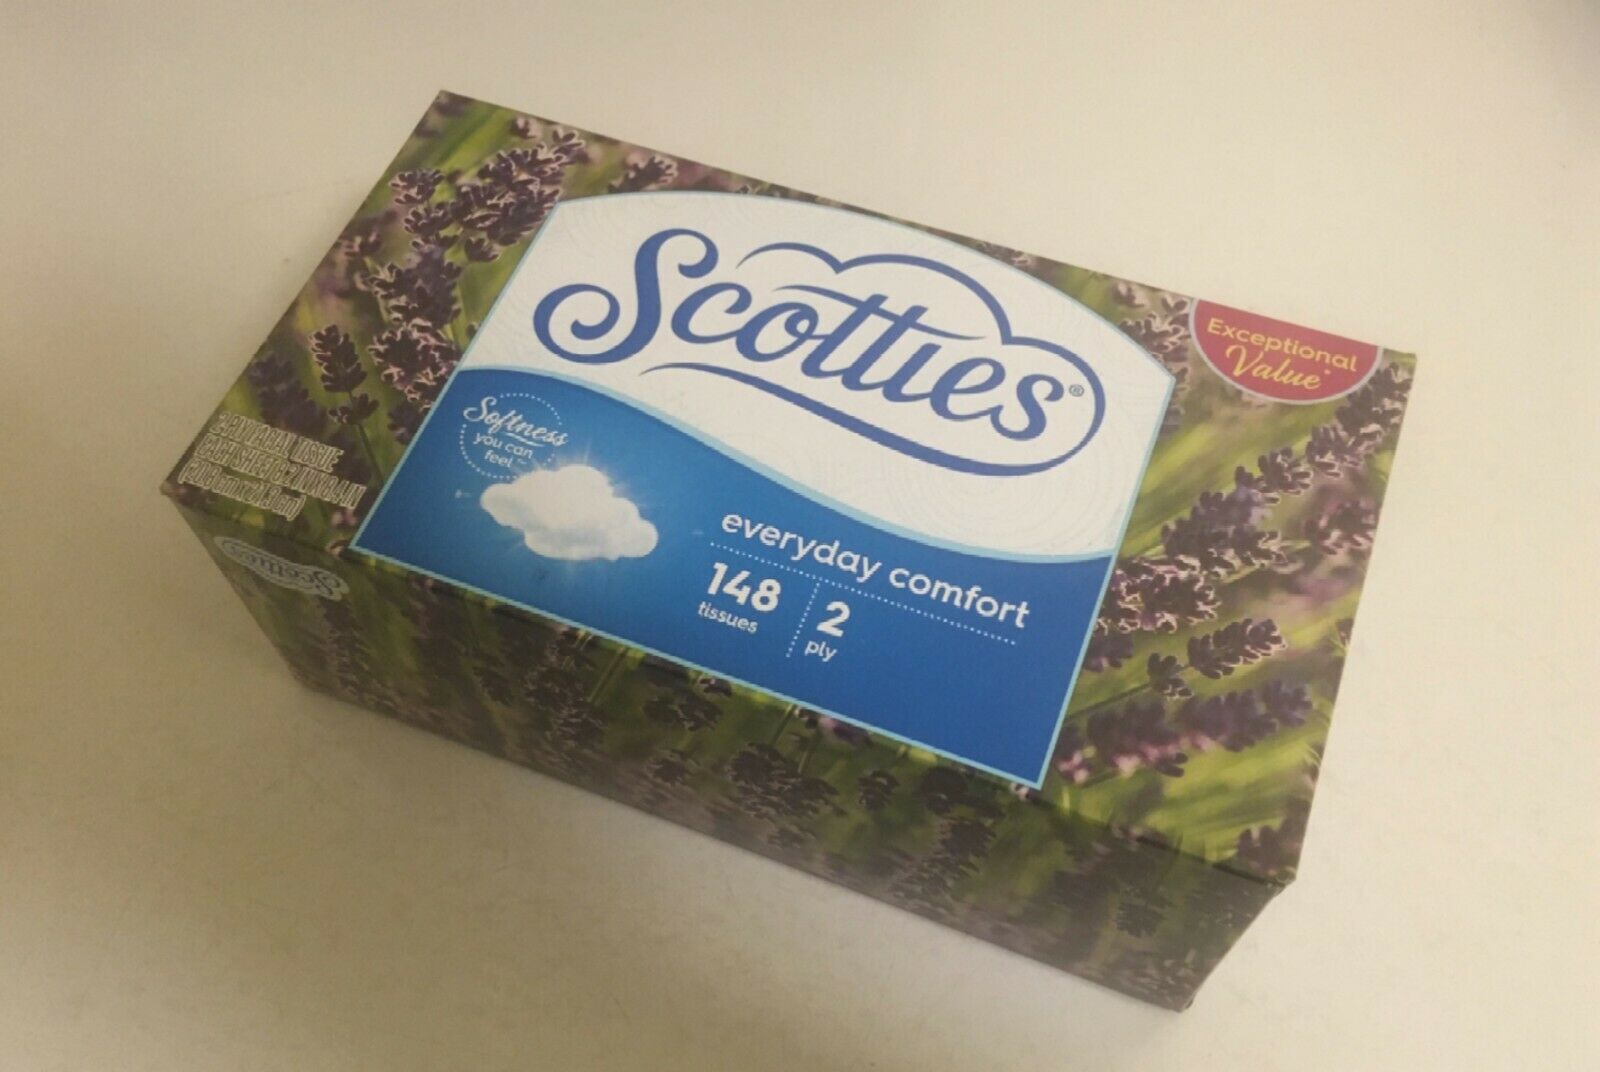 Scottie Boxed Facial Tissues. 2 Ply 148 Ctt. Choice Of Patterns